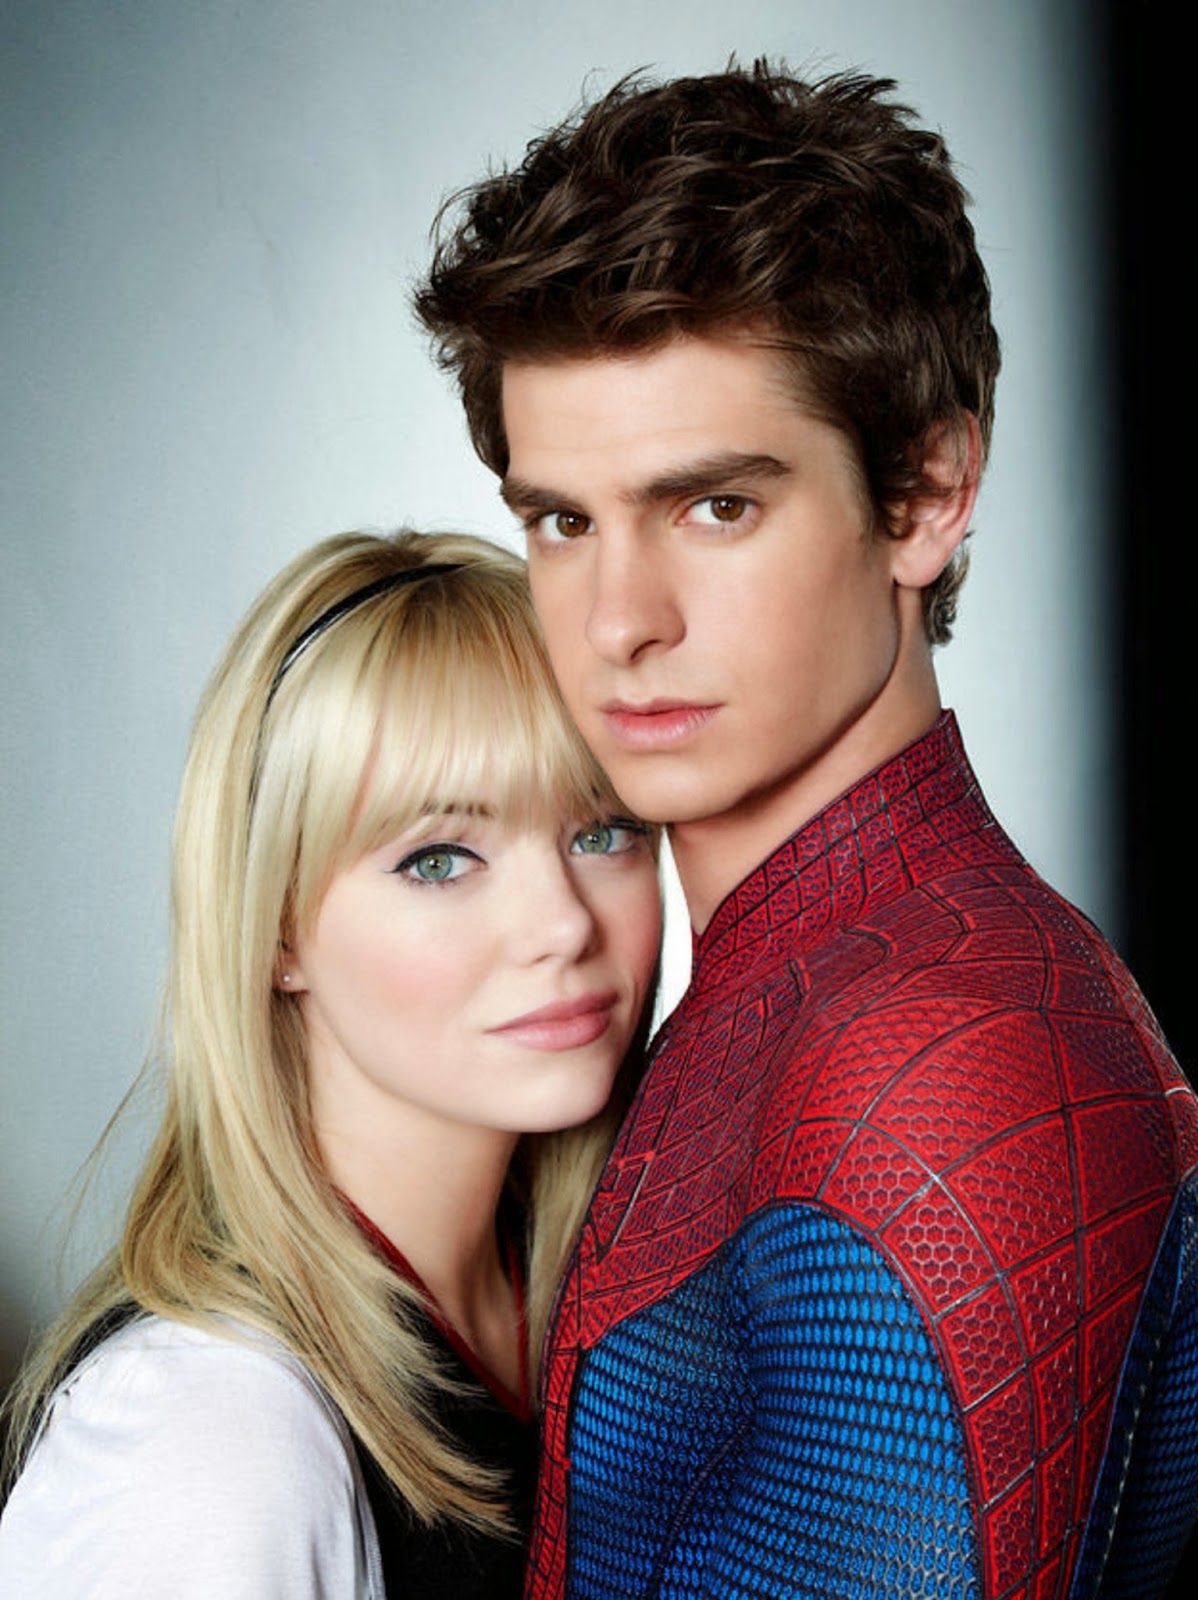 Every Couples HD Wallpaper Download: Emma Stone & Andrew Garfield Wallpaper Download